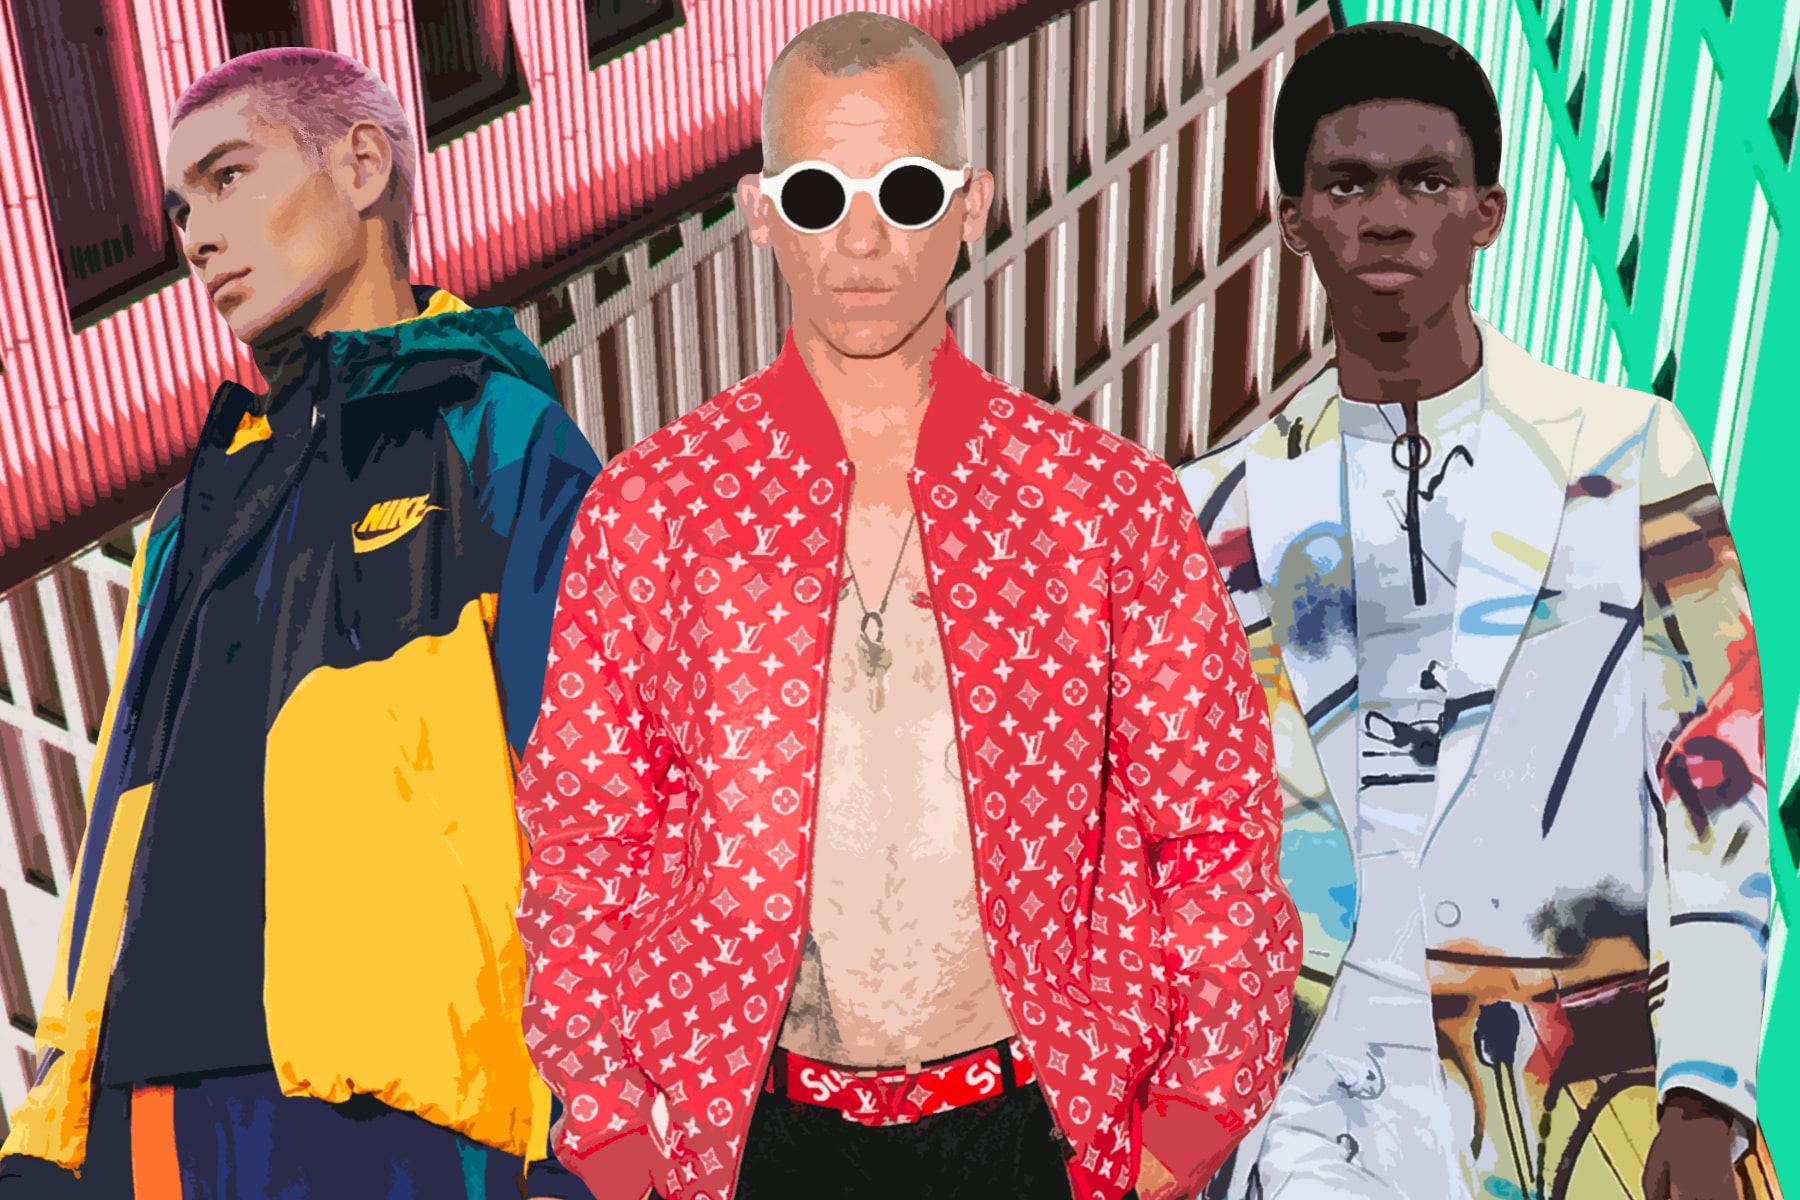 Pharrell Is Now a Celebrity Designer. Is He Fashion's New Norm? - WSJ